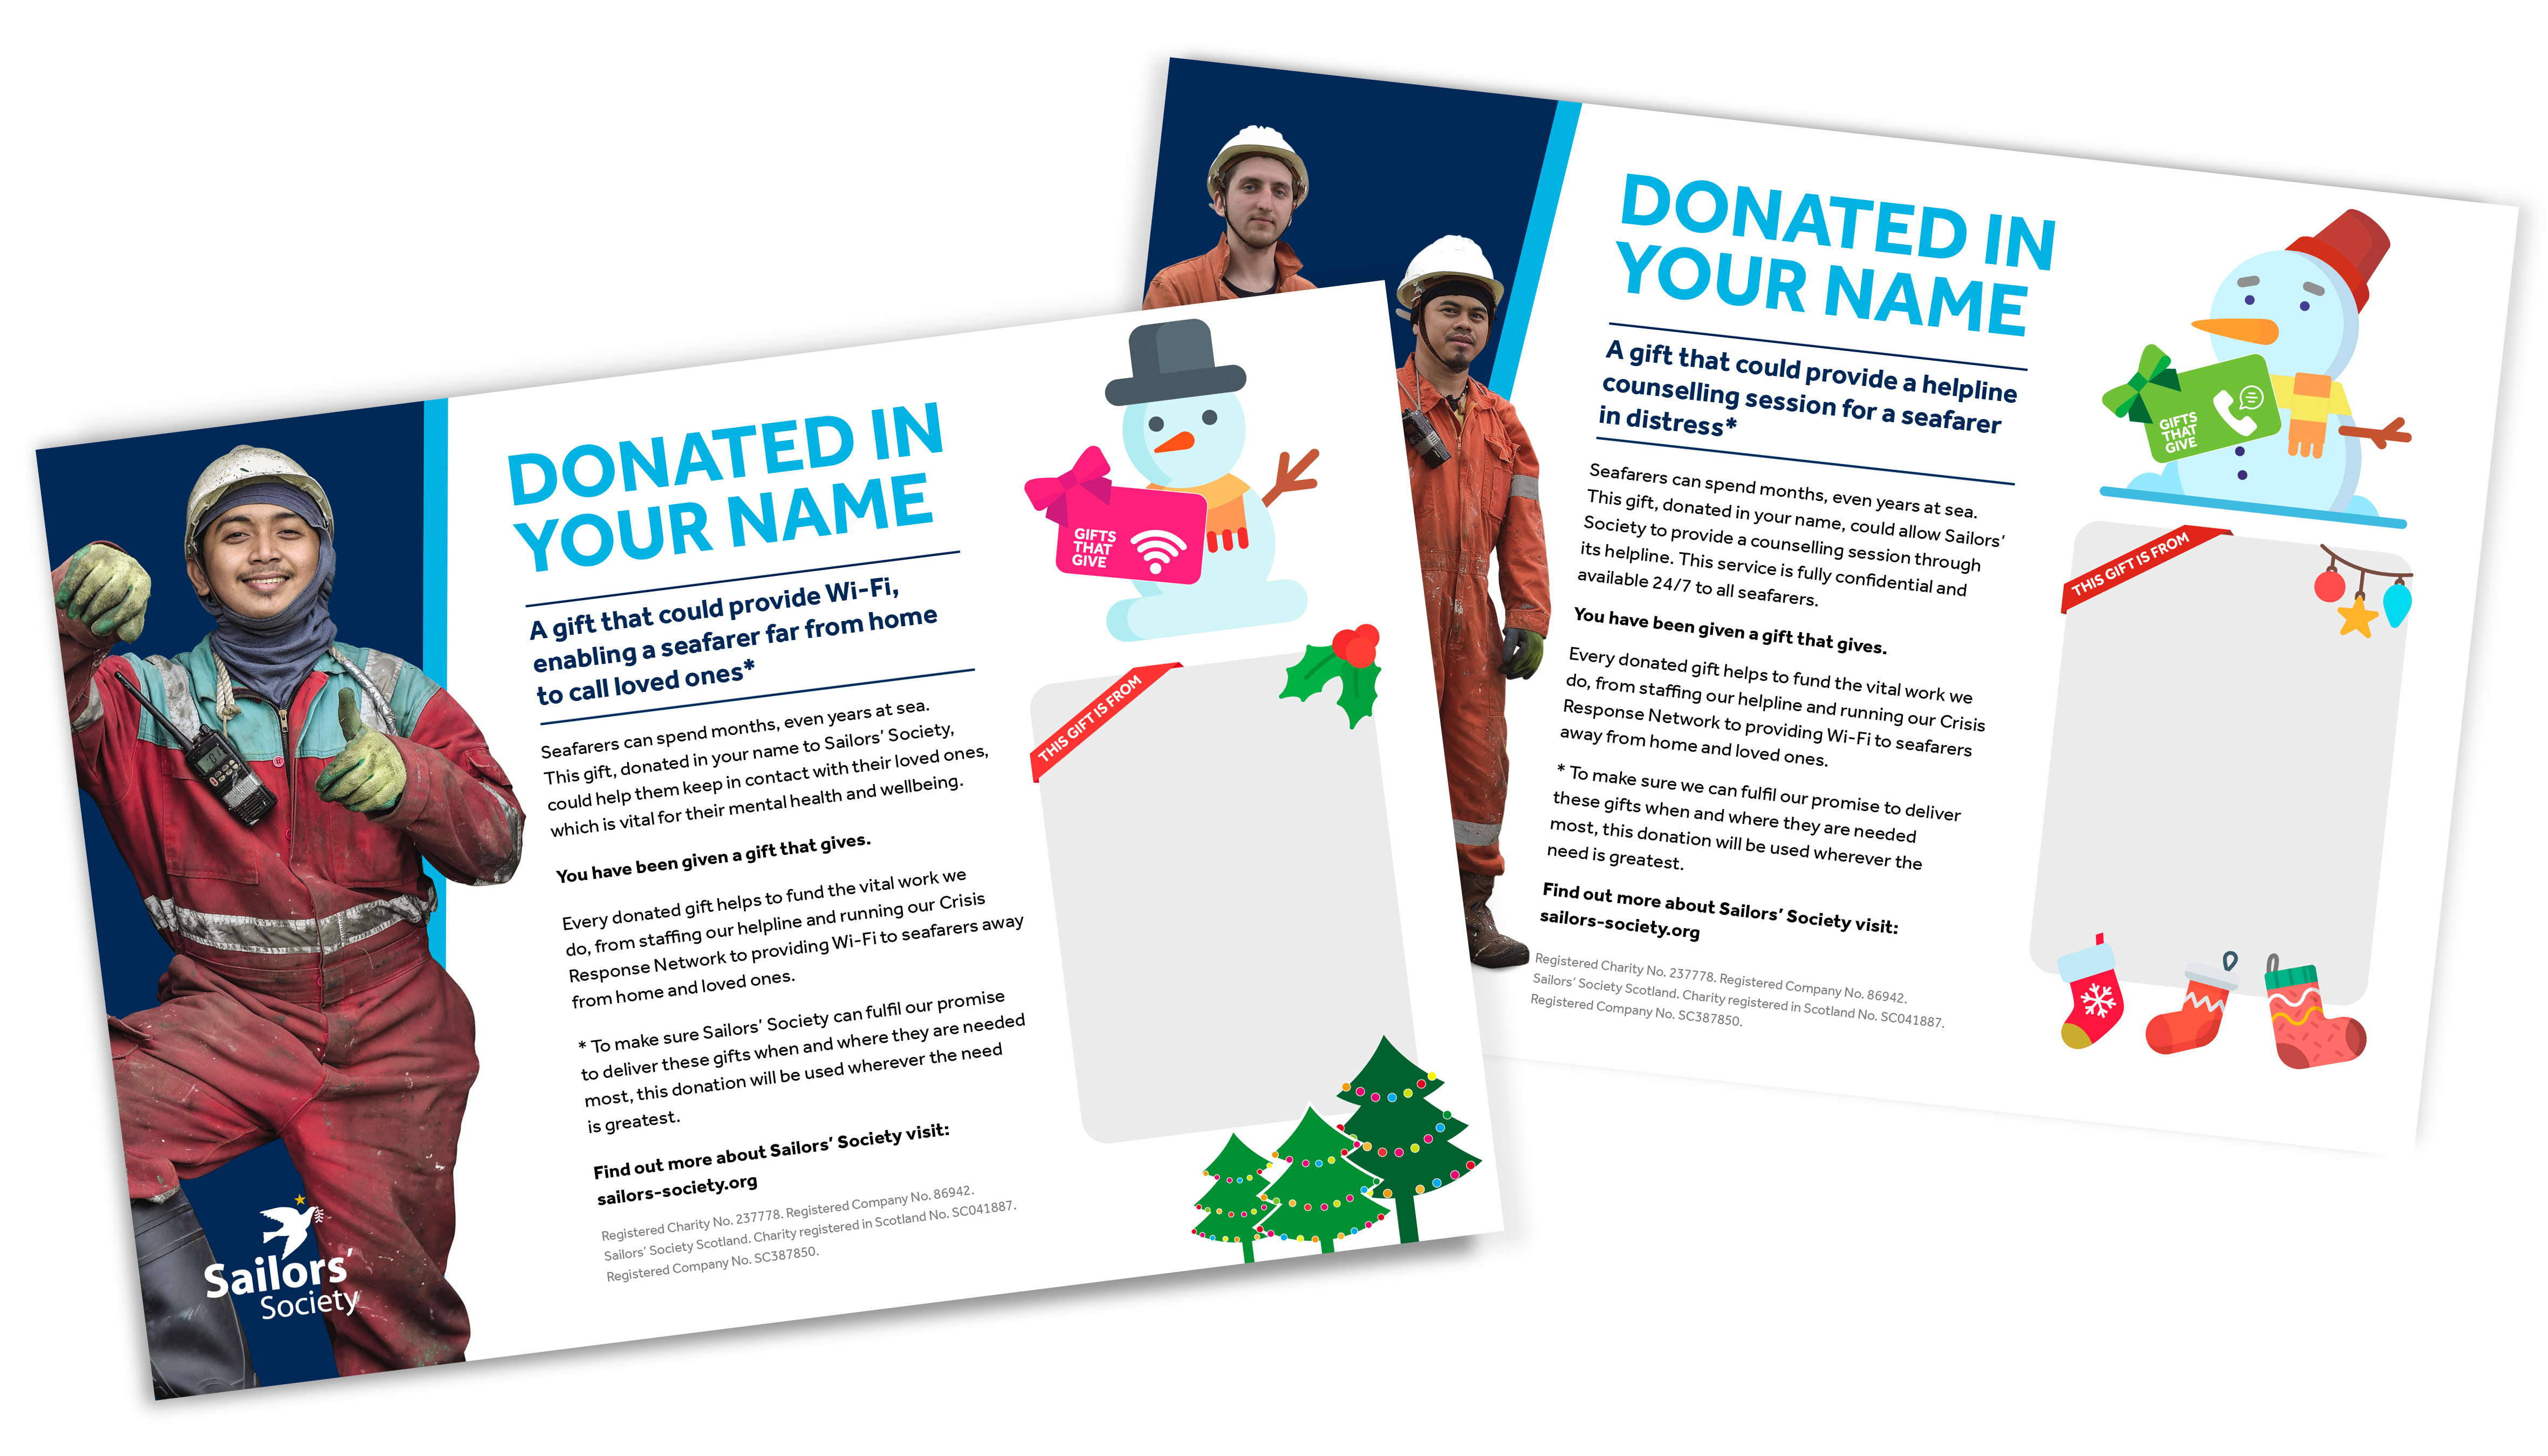 Help seafarers this Christmas with a virtual gift from Sailors’ Society